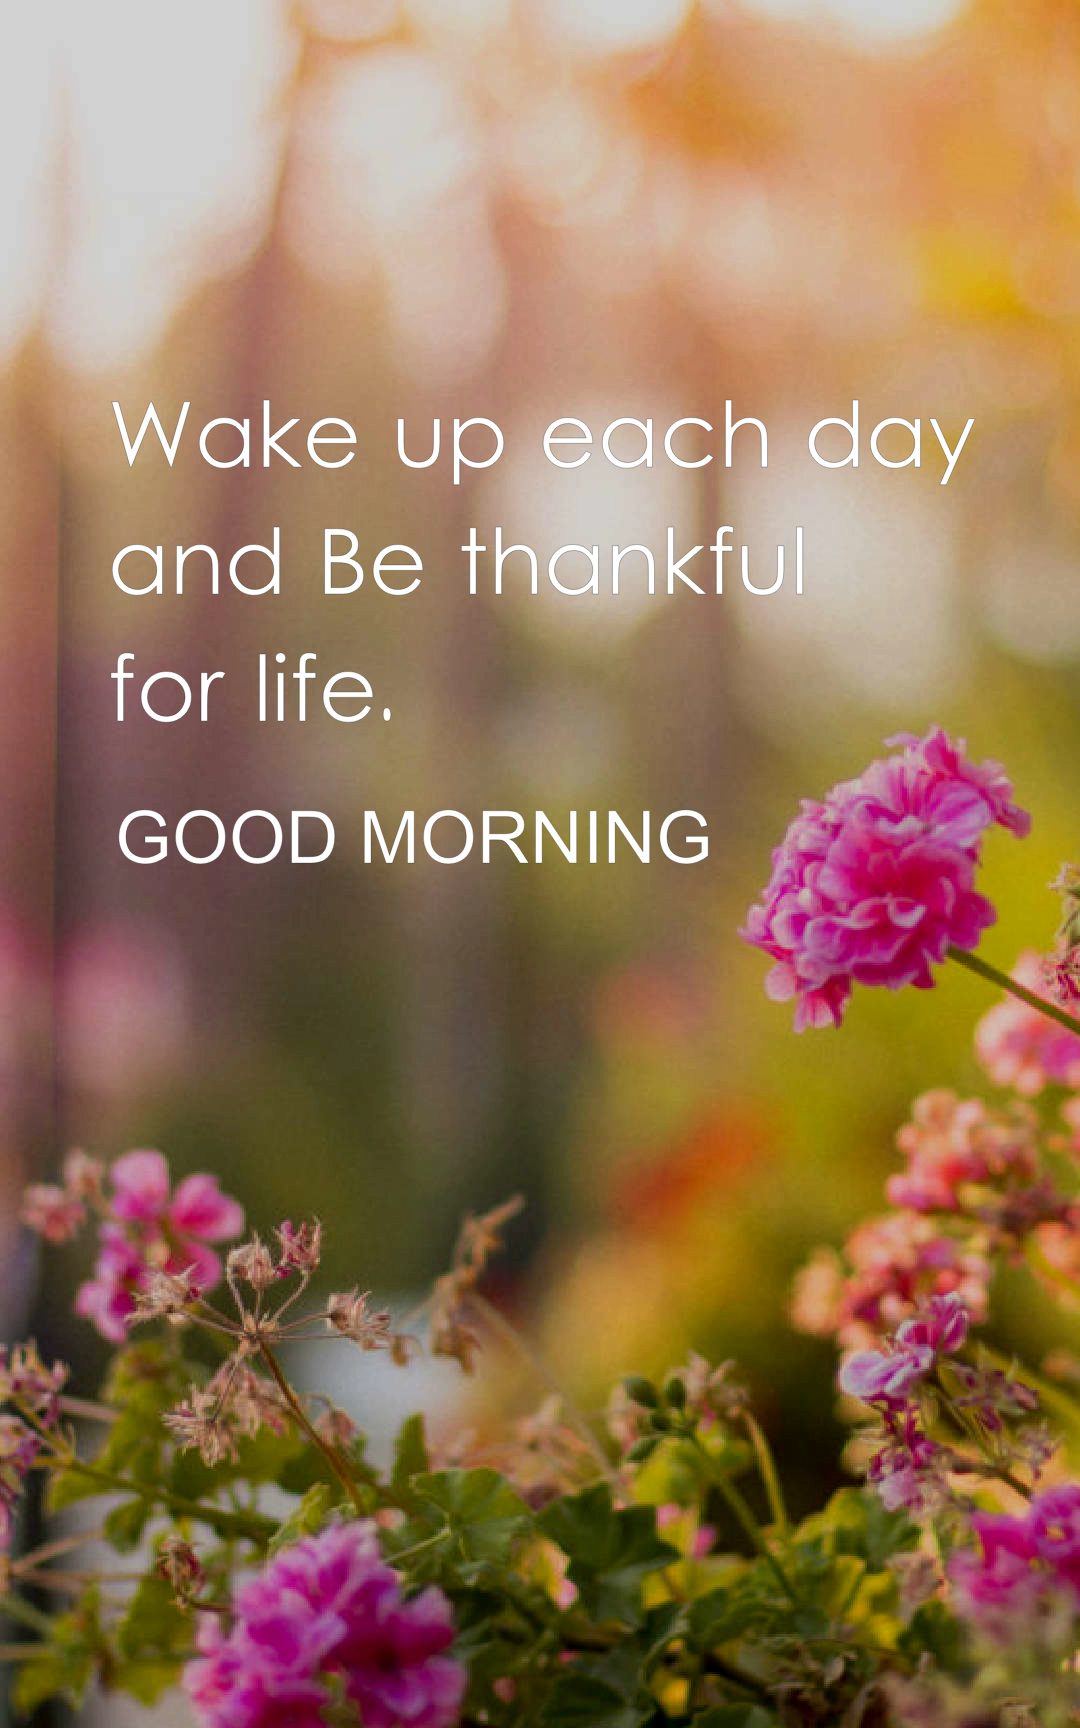 Wake up each day and Be thankful for life